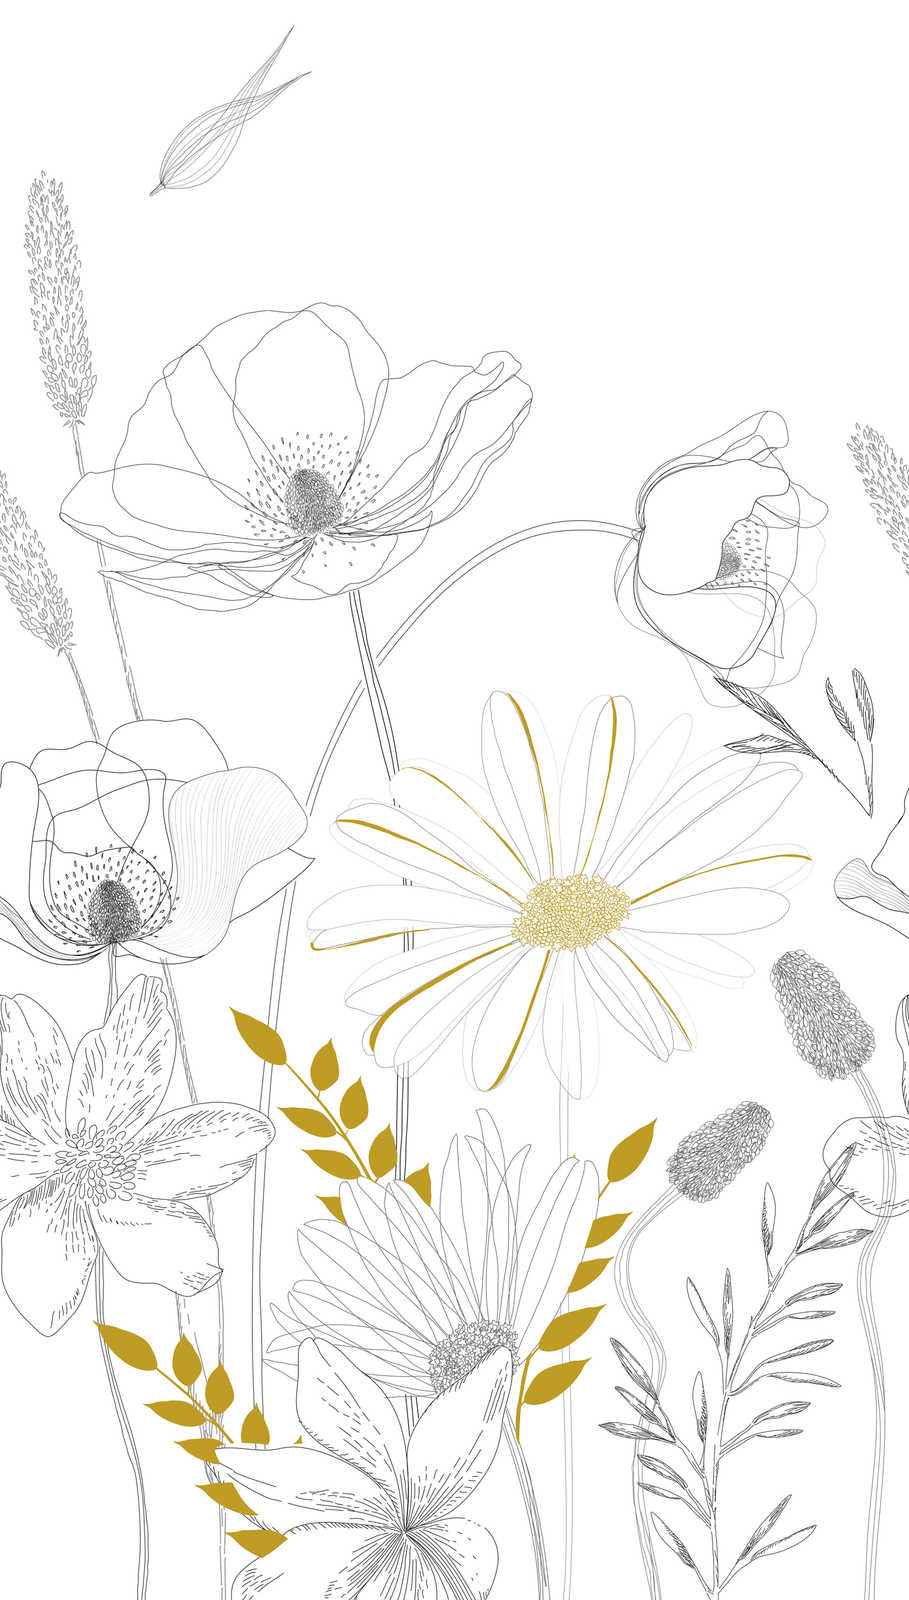             Drawn Floral Motif Wallpaper with Colour Accents - White, Black, Yellow
        